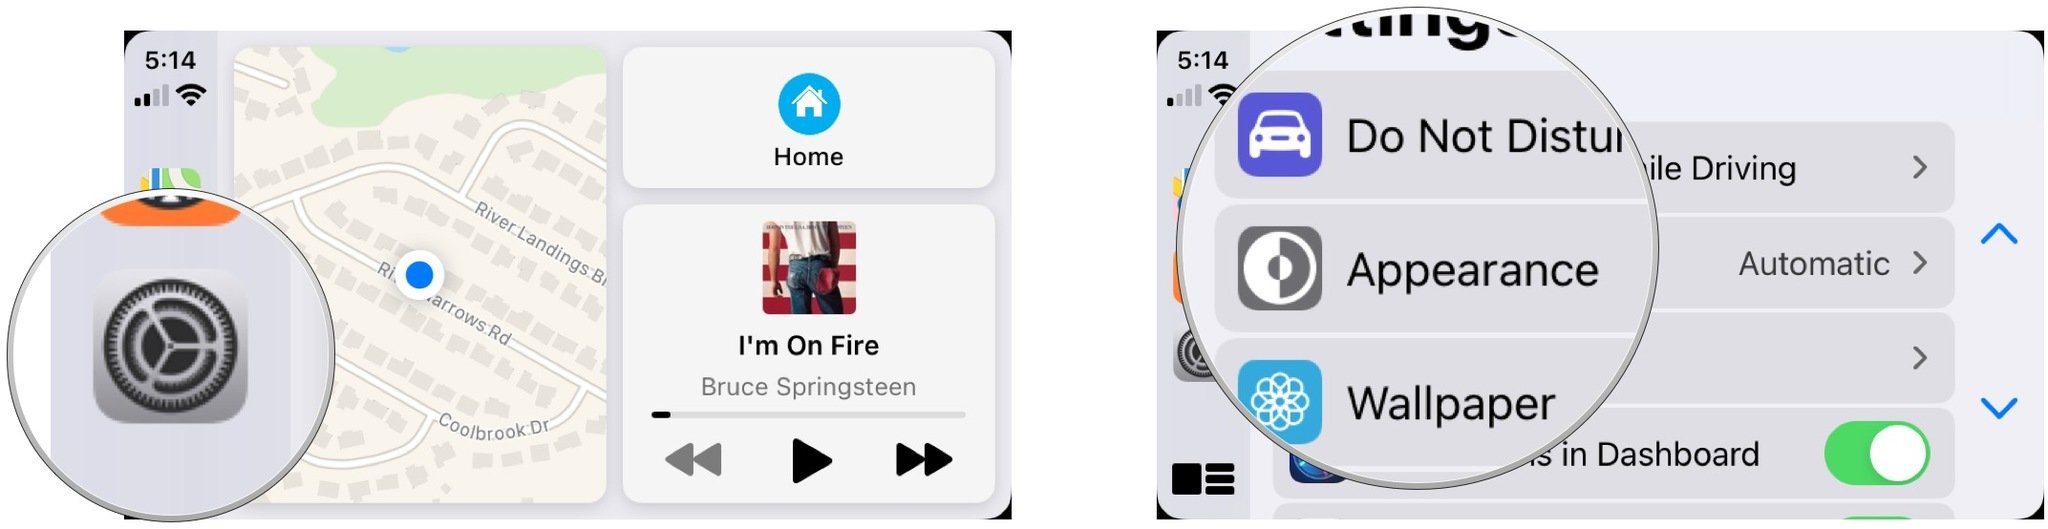 Change CarPlay appearance, showing how to open Settings, then tap Appearance